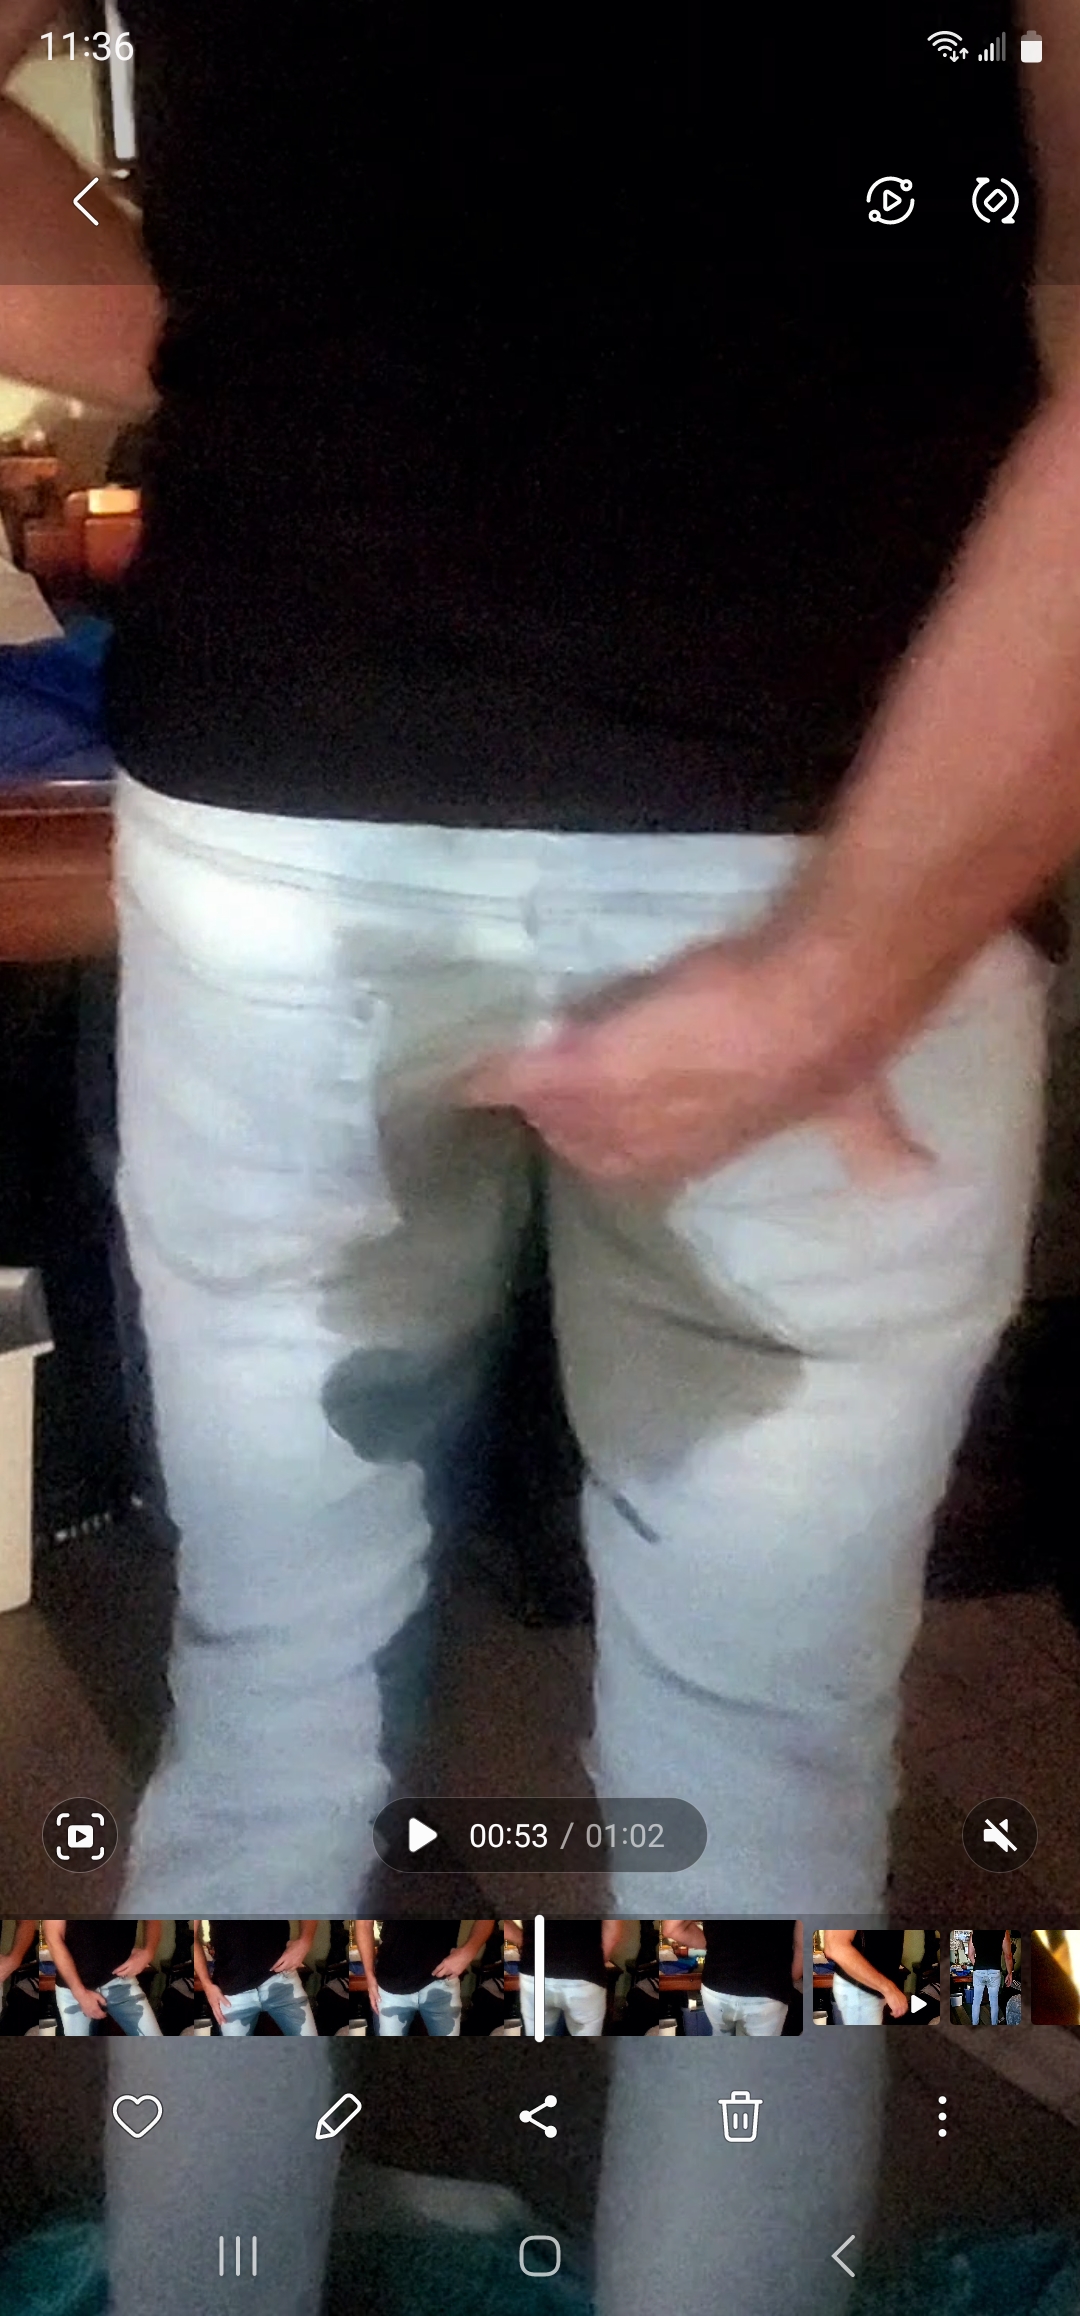 Accident in tight jeans